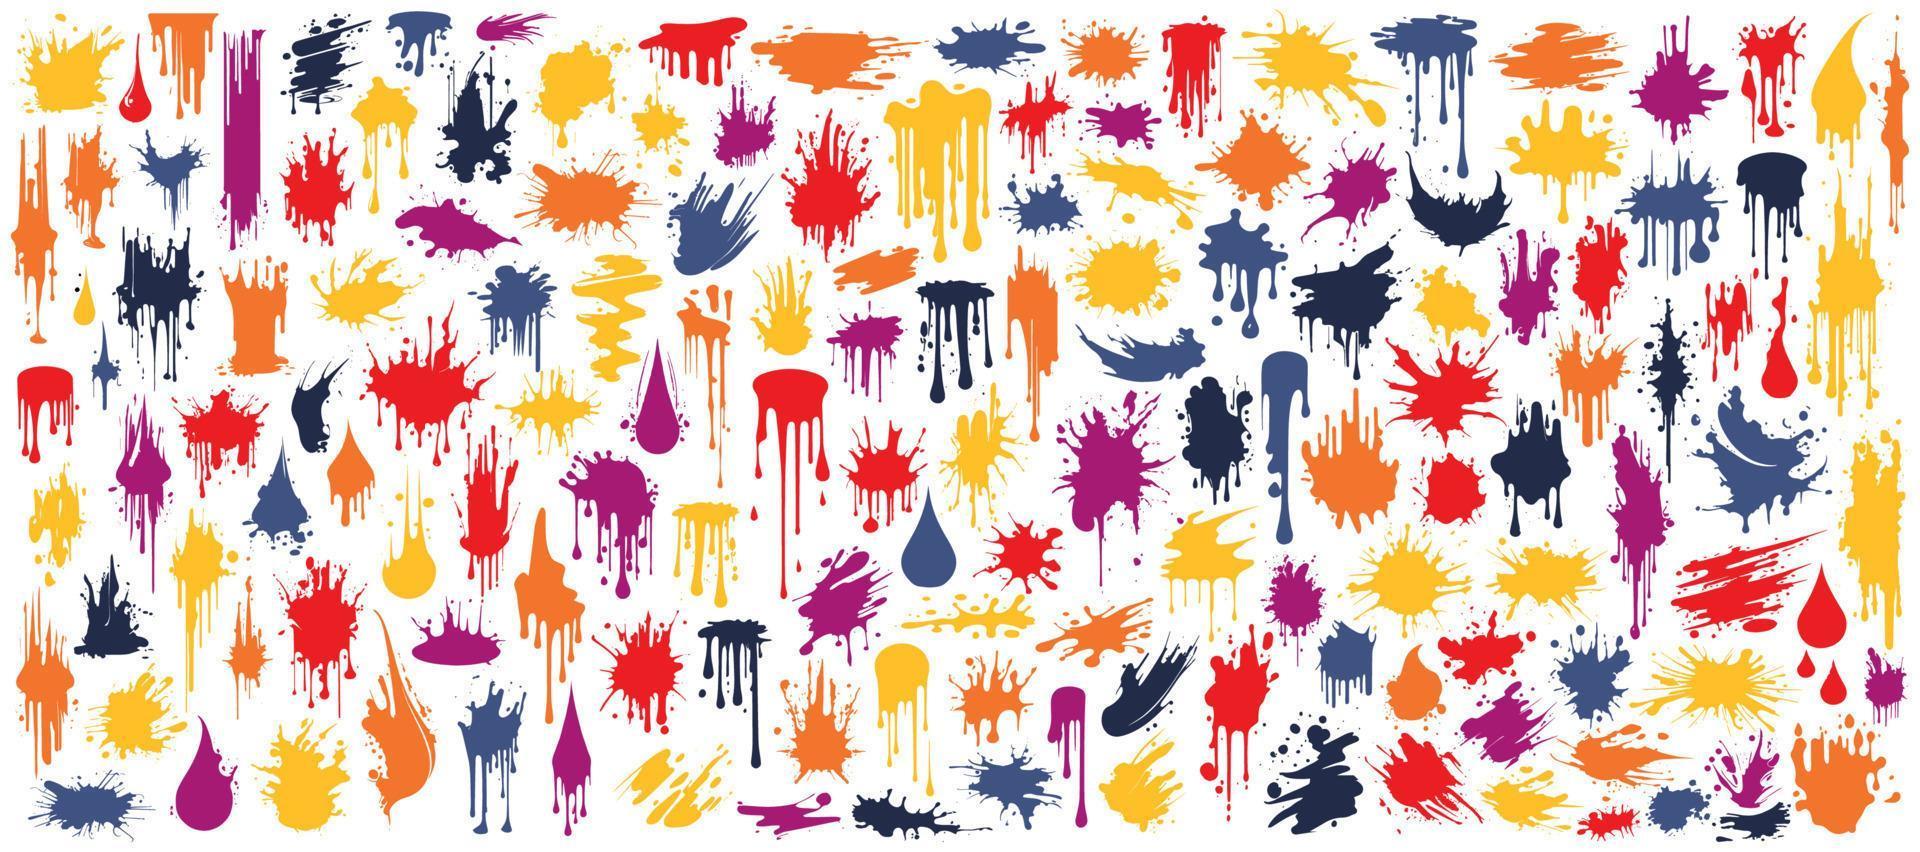 Mega Set of colorful vector brushes, various brush strokes. Colored paint splatters, smudges, freehand circles, grungy drawn lines, waves, circles, triangles, art design elements